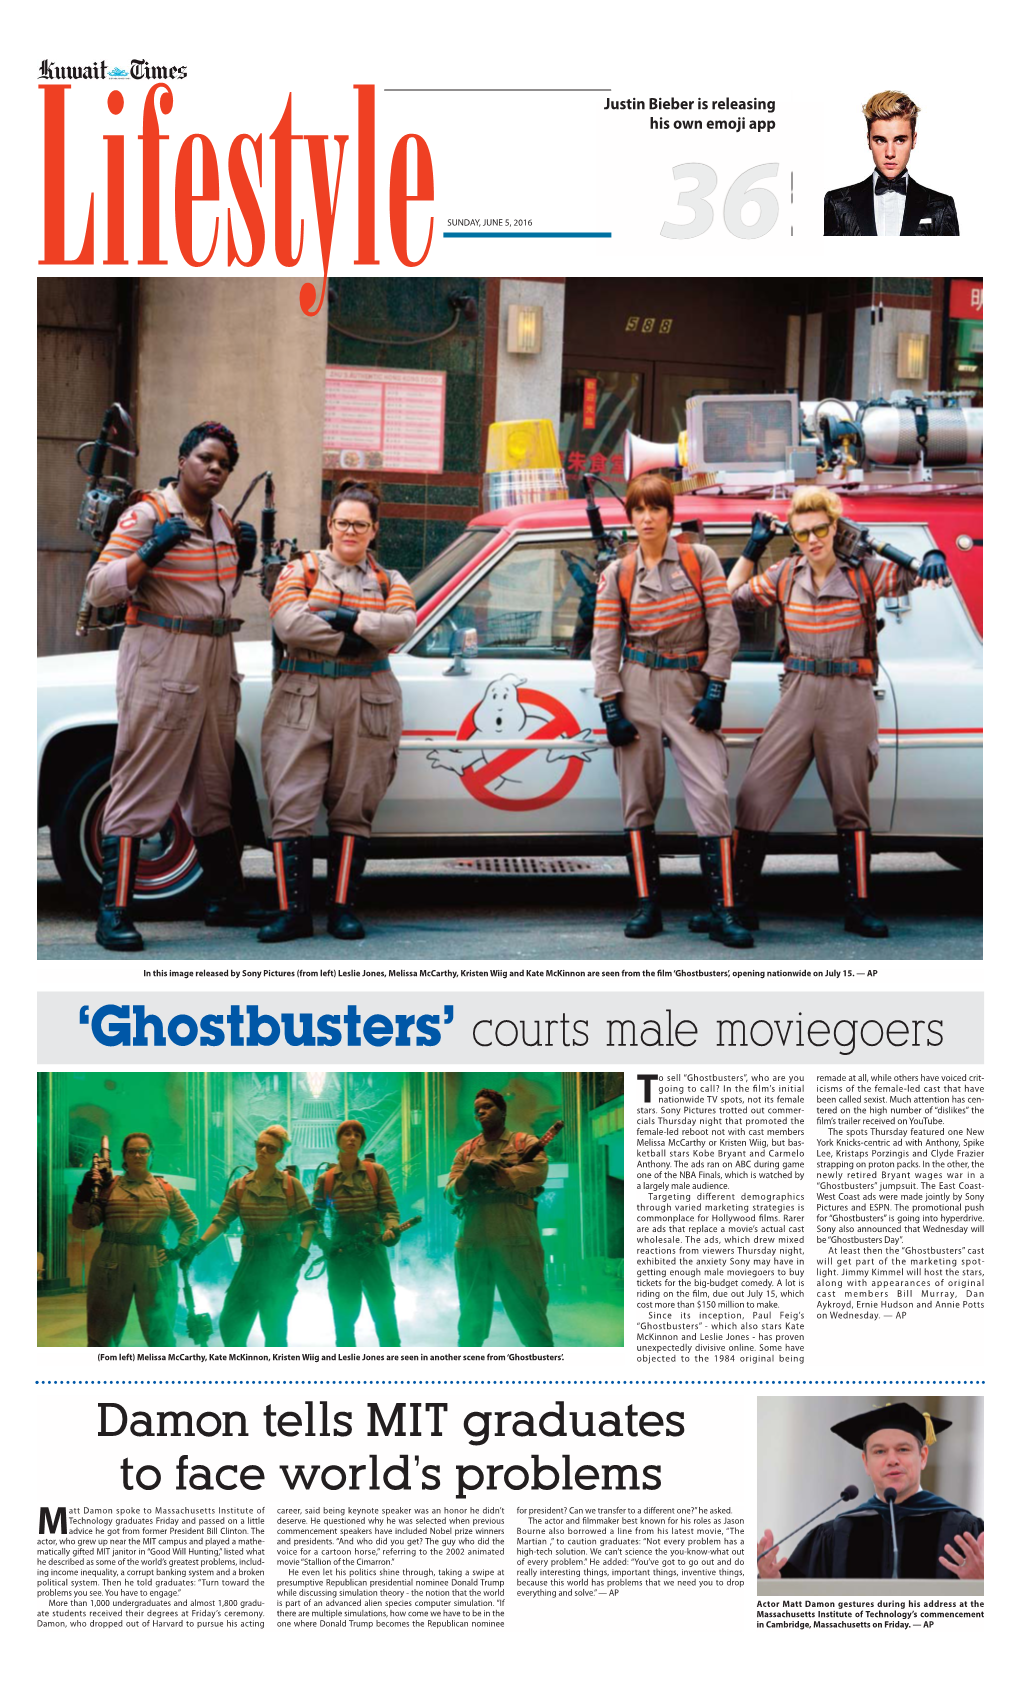 Ghostbusters’, Opening Nationwide on July 15